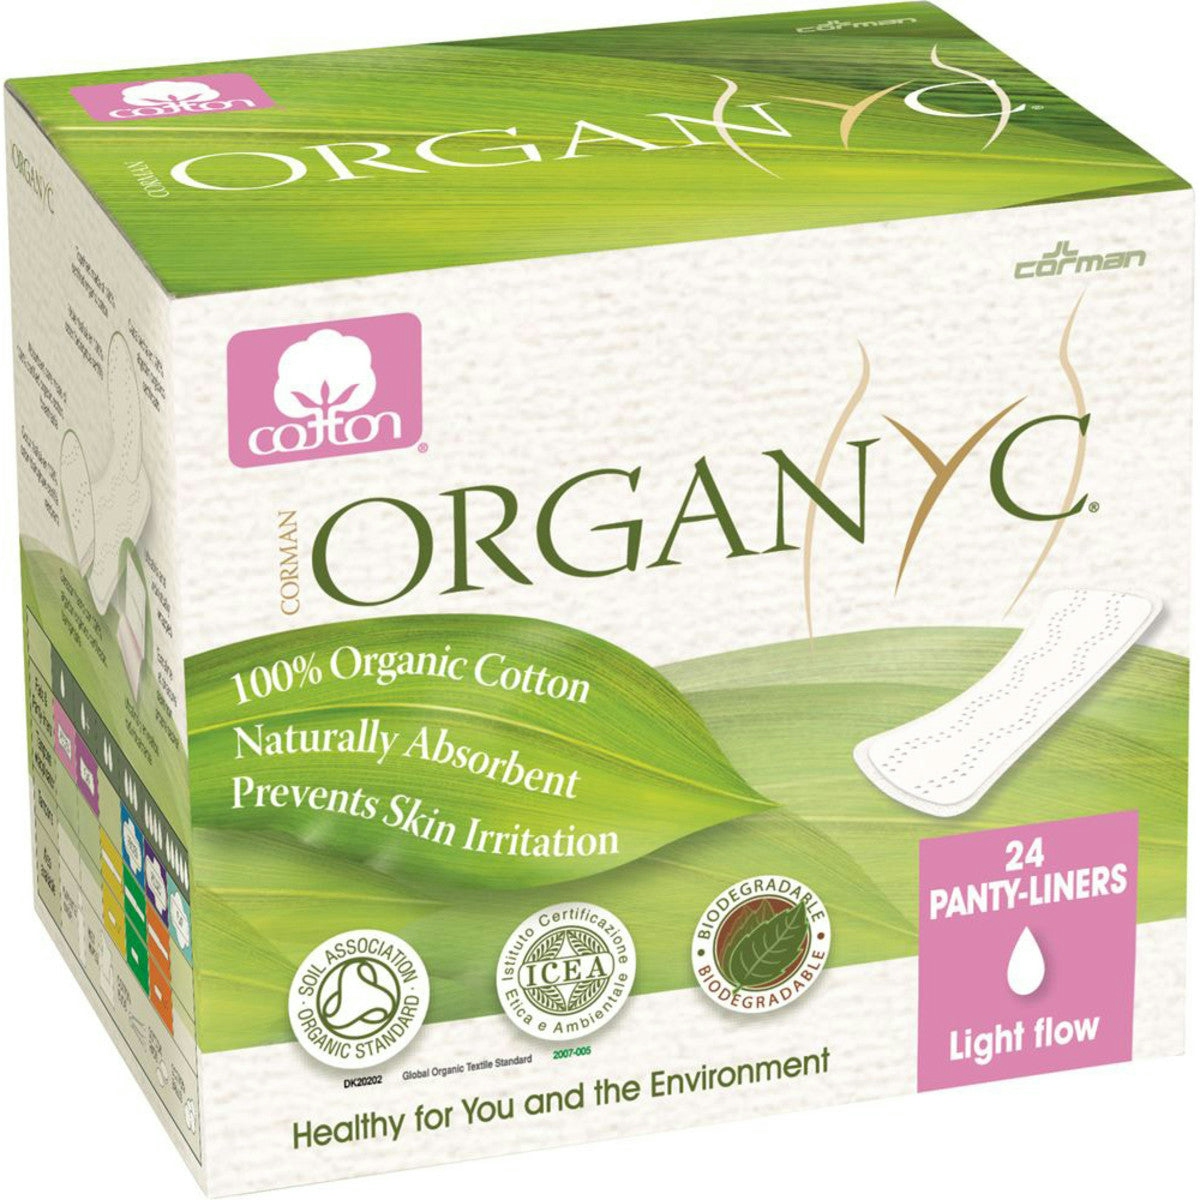 image of Organyc Organic Cotton Panty-Liners (Ultra Thin) Light x 24 Pack on white background 